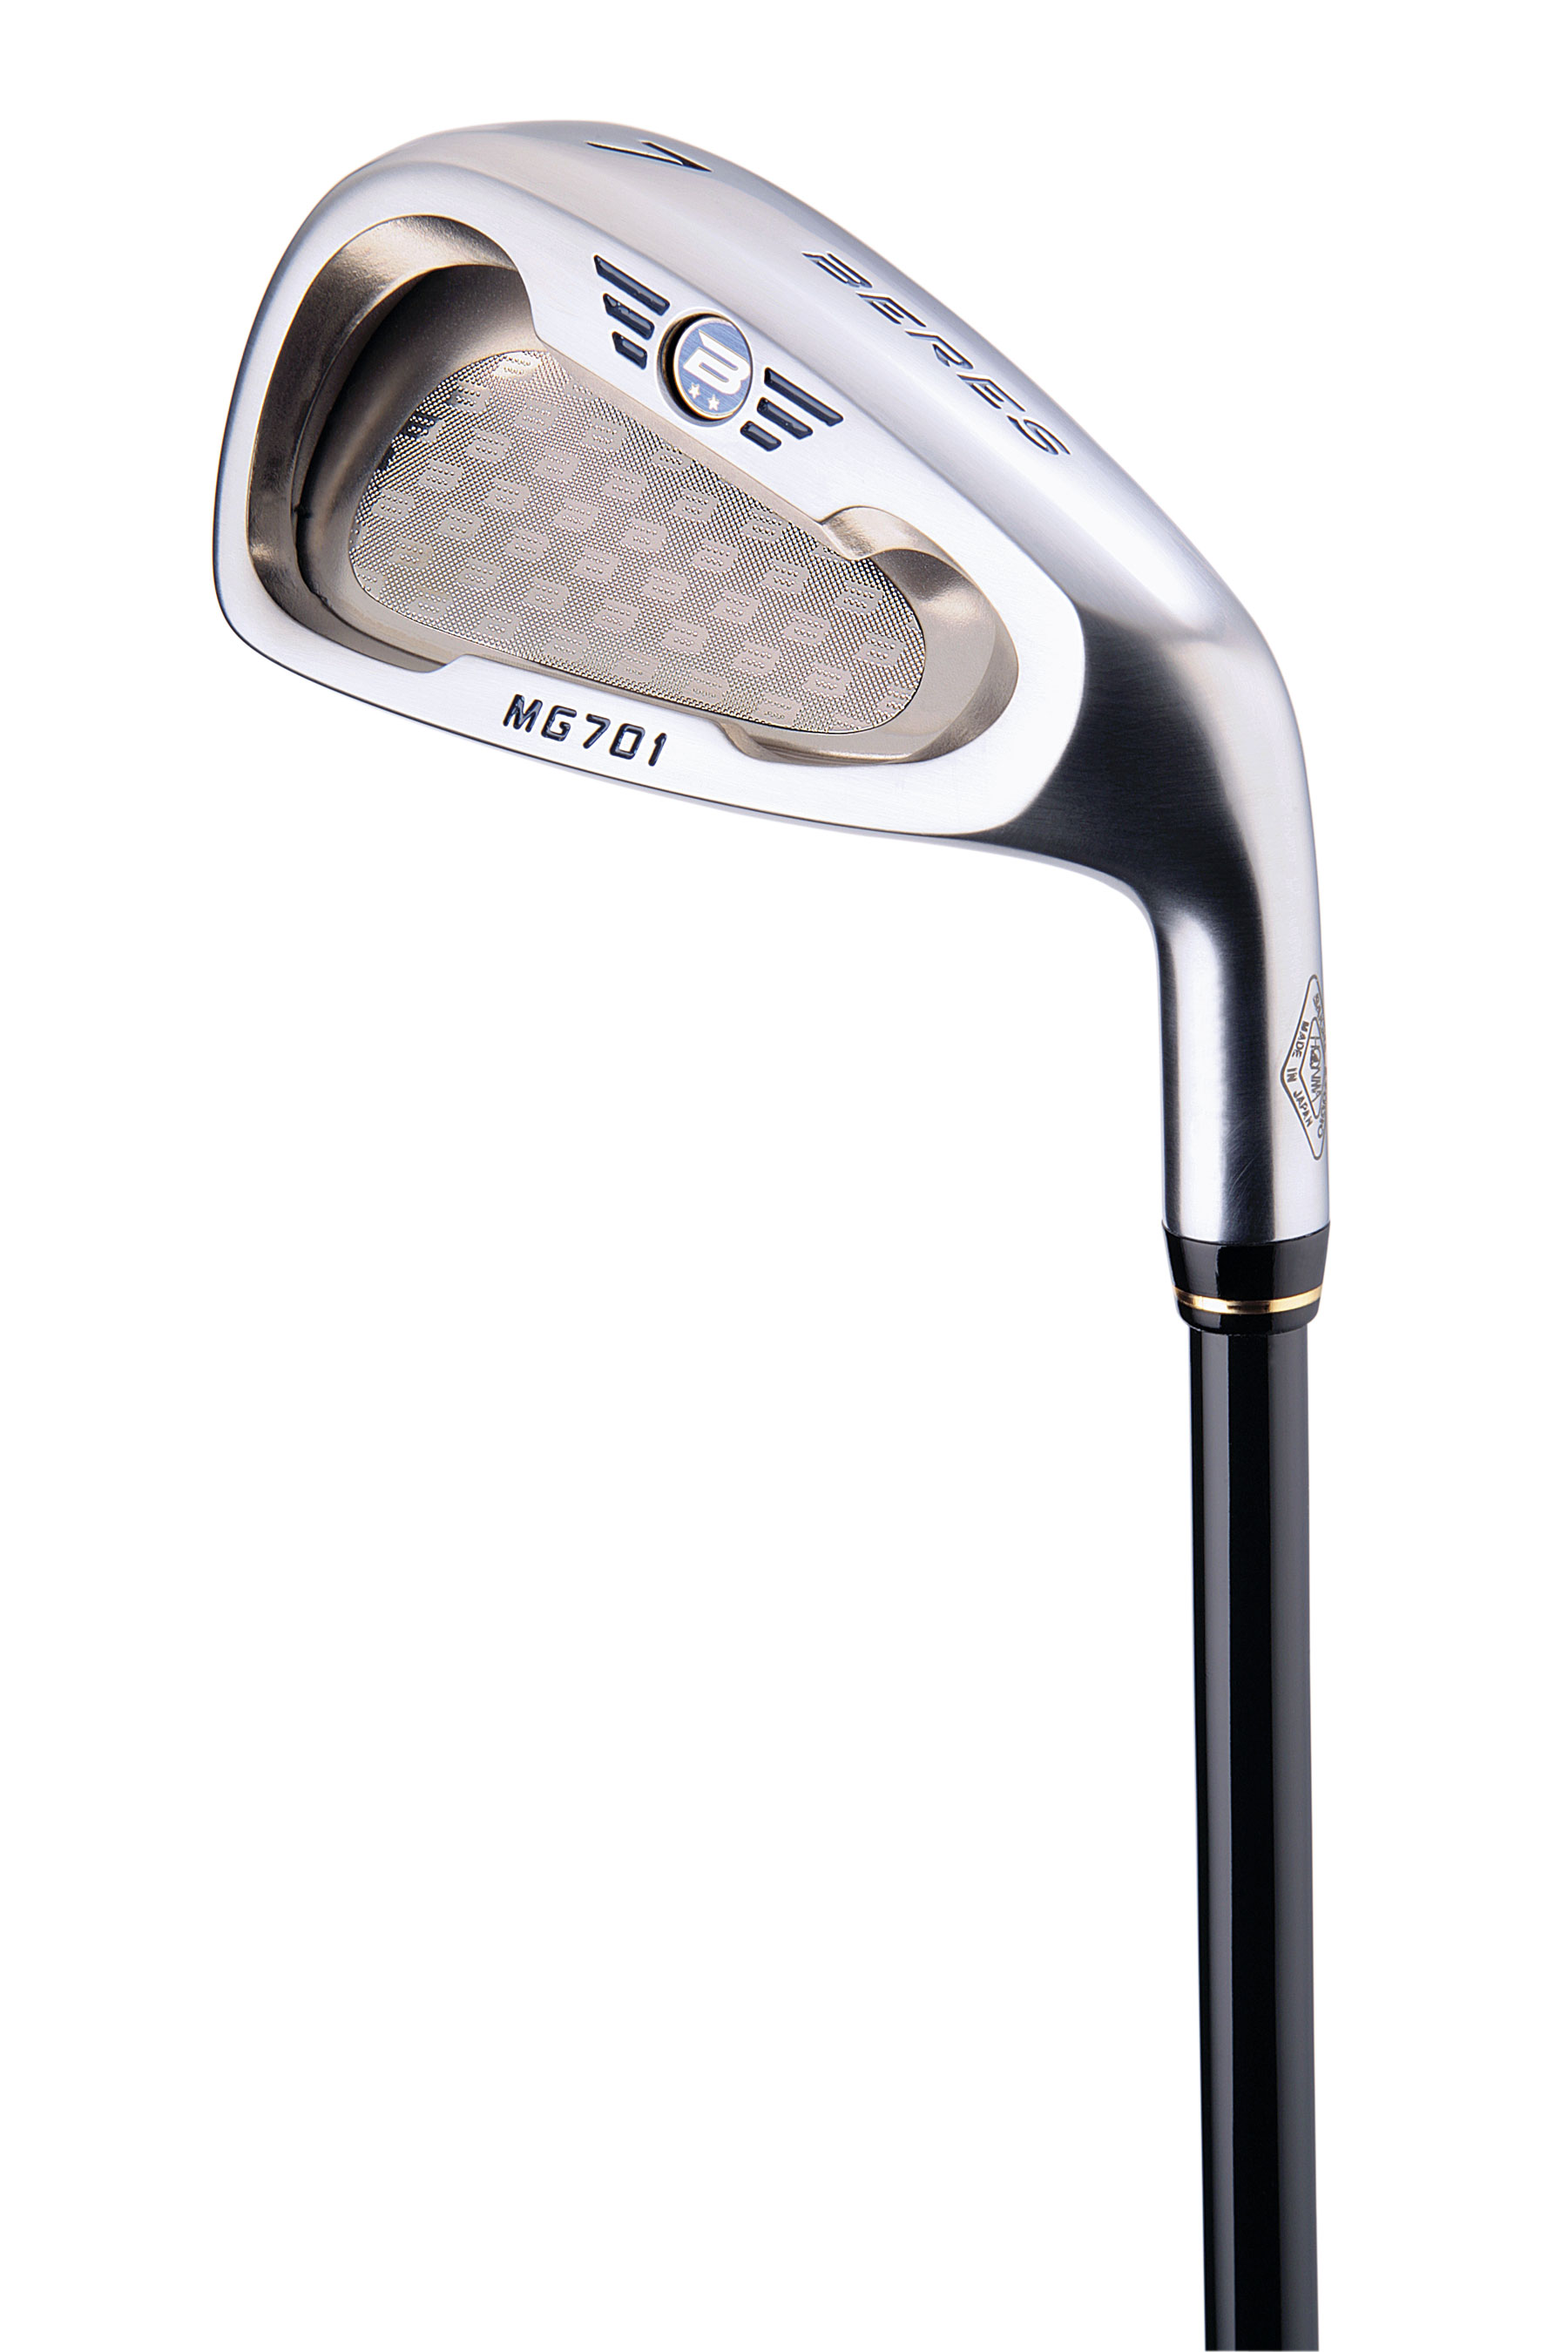 Honma Beres MG701 | Golf Monthly